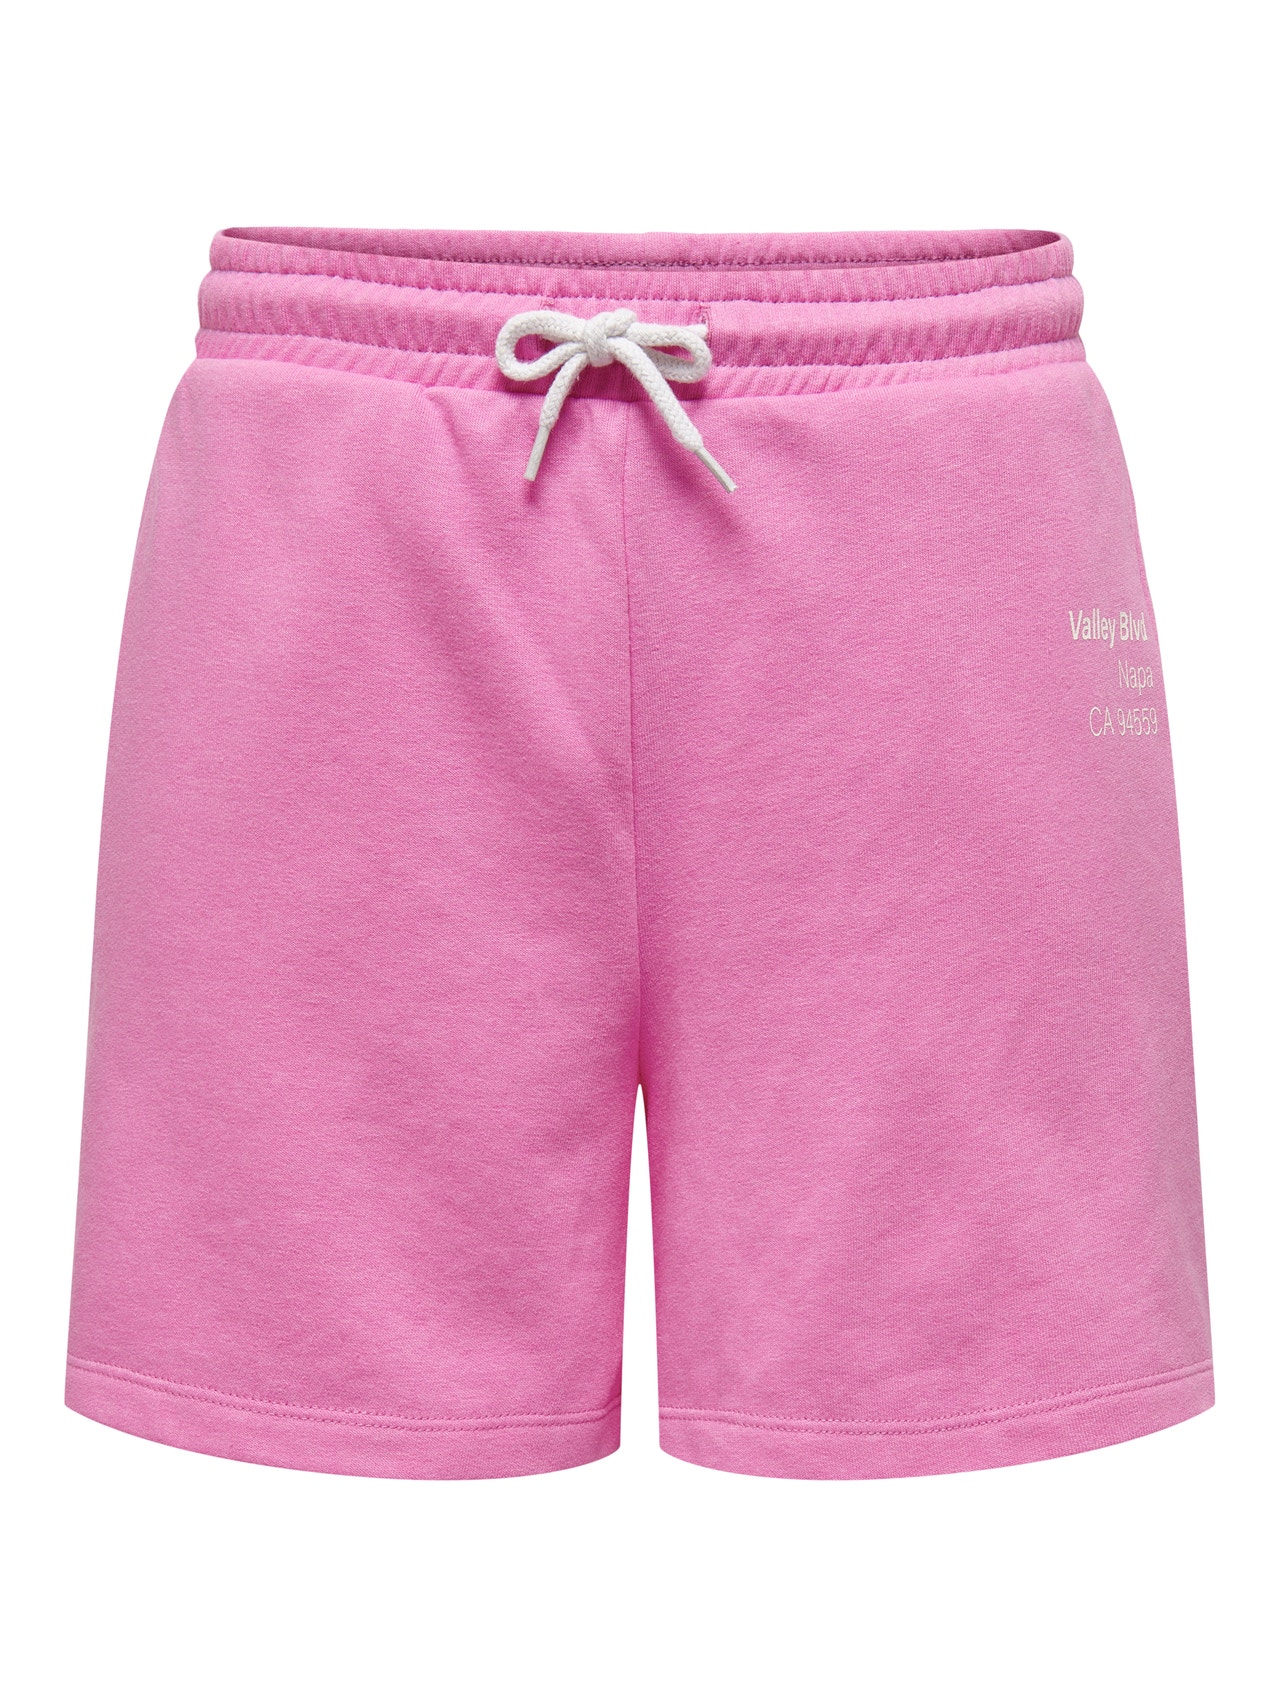 ONLY Normal passform Shorts -Fuchsia Pink - 15293692